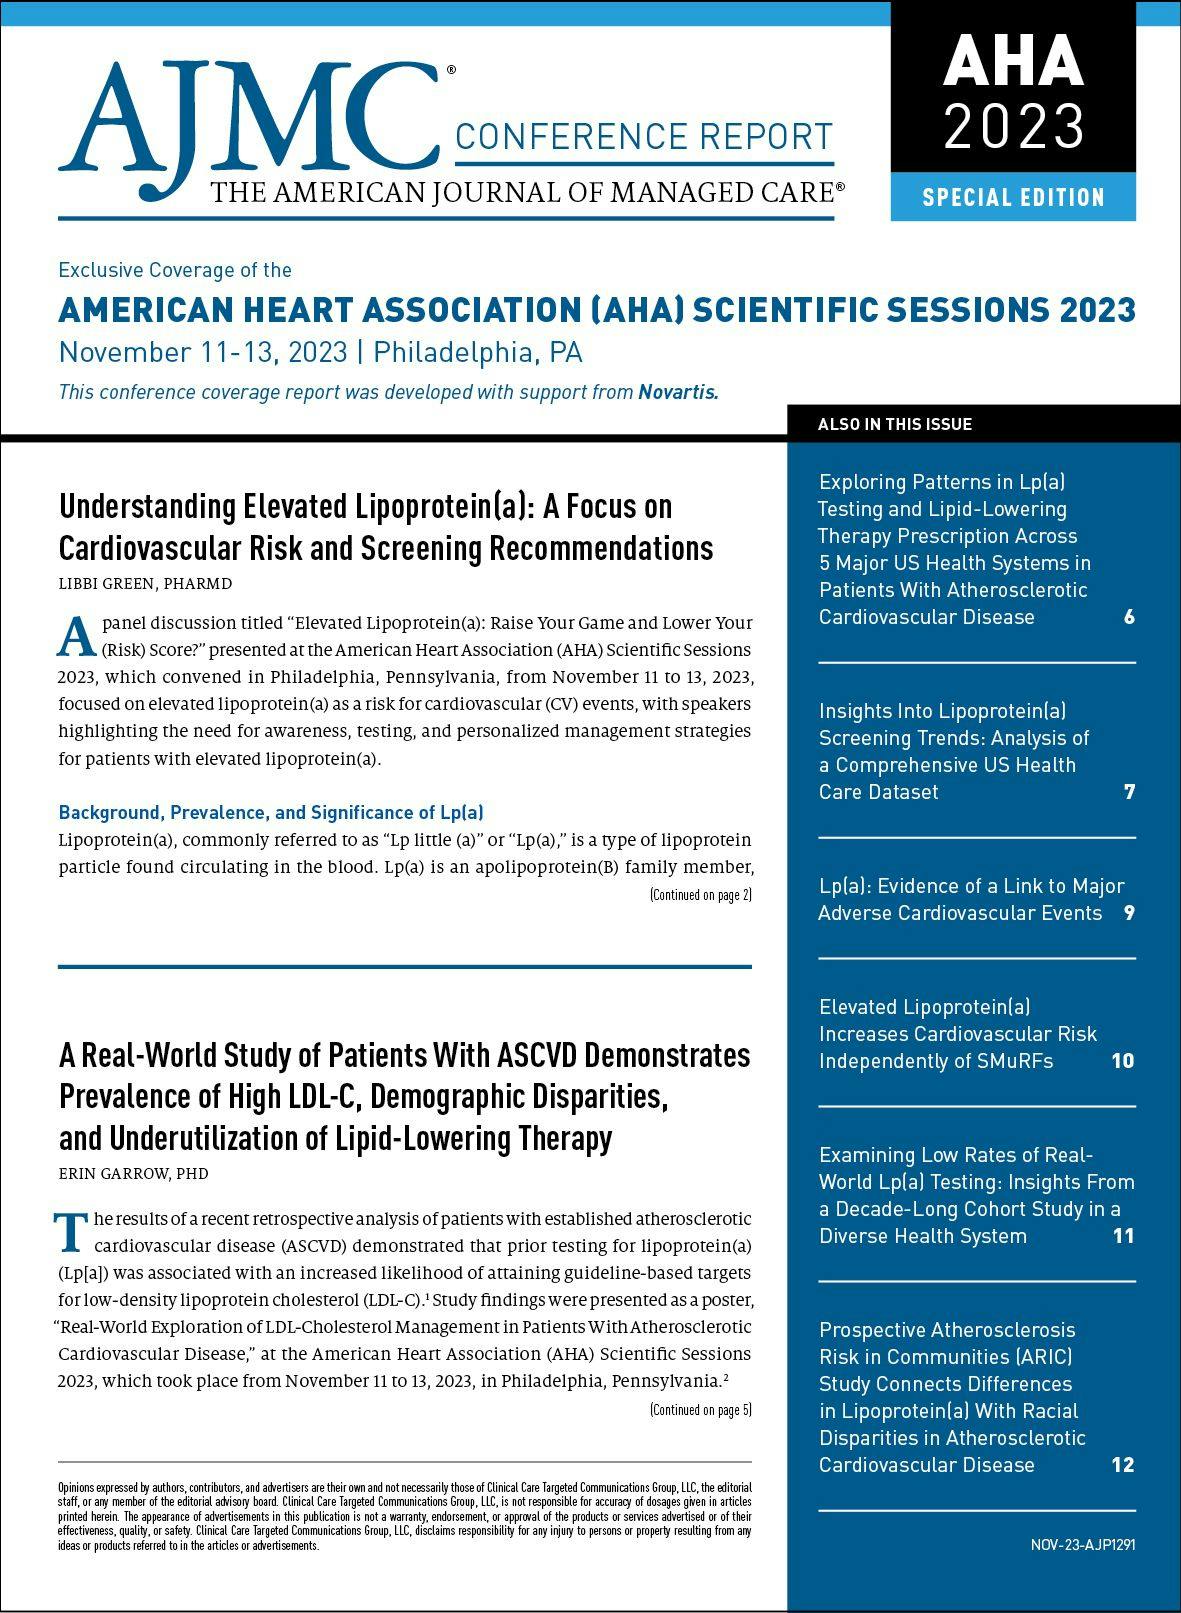 Exclusive Coverage of the American Heart Association (AHA) Scientific Sessions 2023